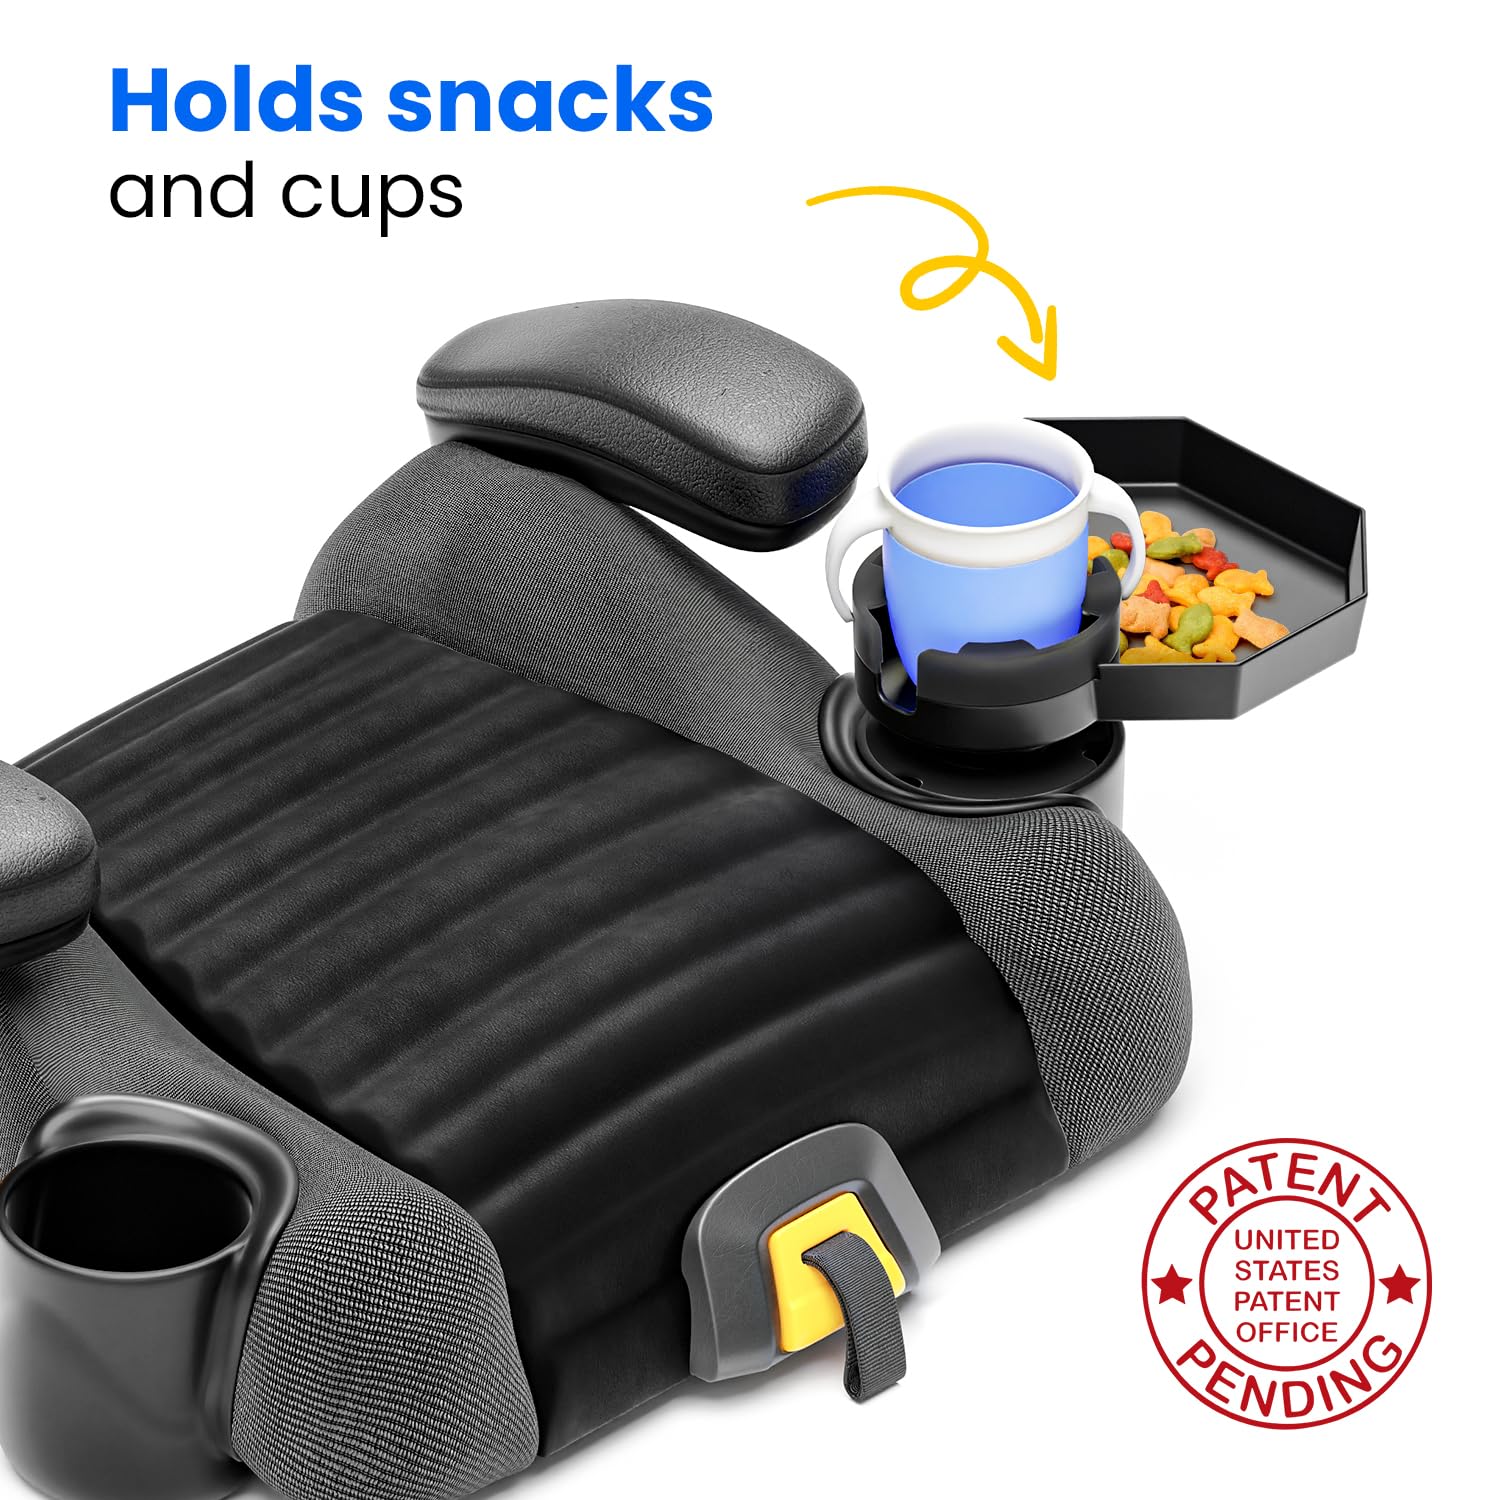 Kids Travel Tray – Large Base - Car Seat and Car Cup Holder Tray - Tray for Snacks, Entertainment, Toys – Includes Cup Holder – Fits Most Car Seats